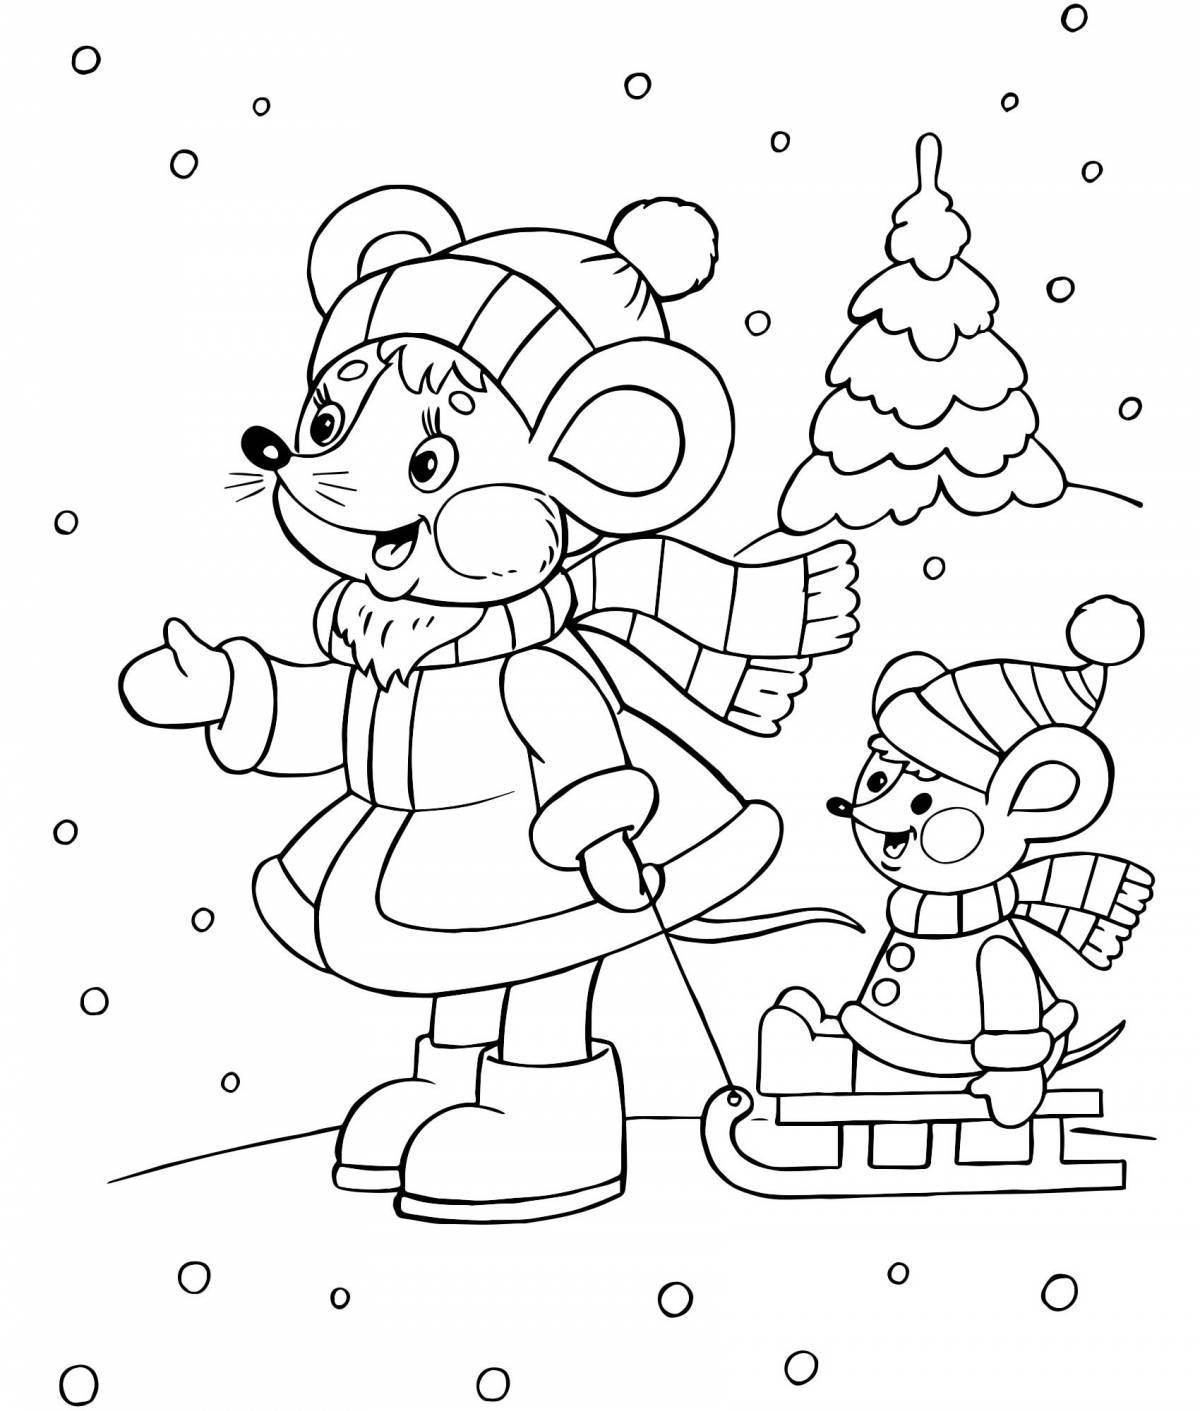 Amazing Christmas coloring book for kids 3-4 years old